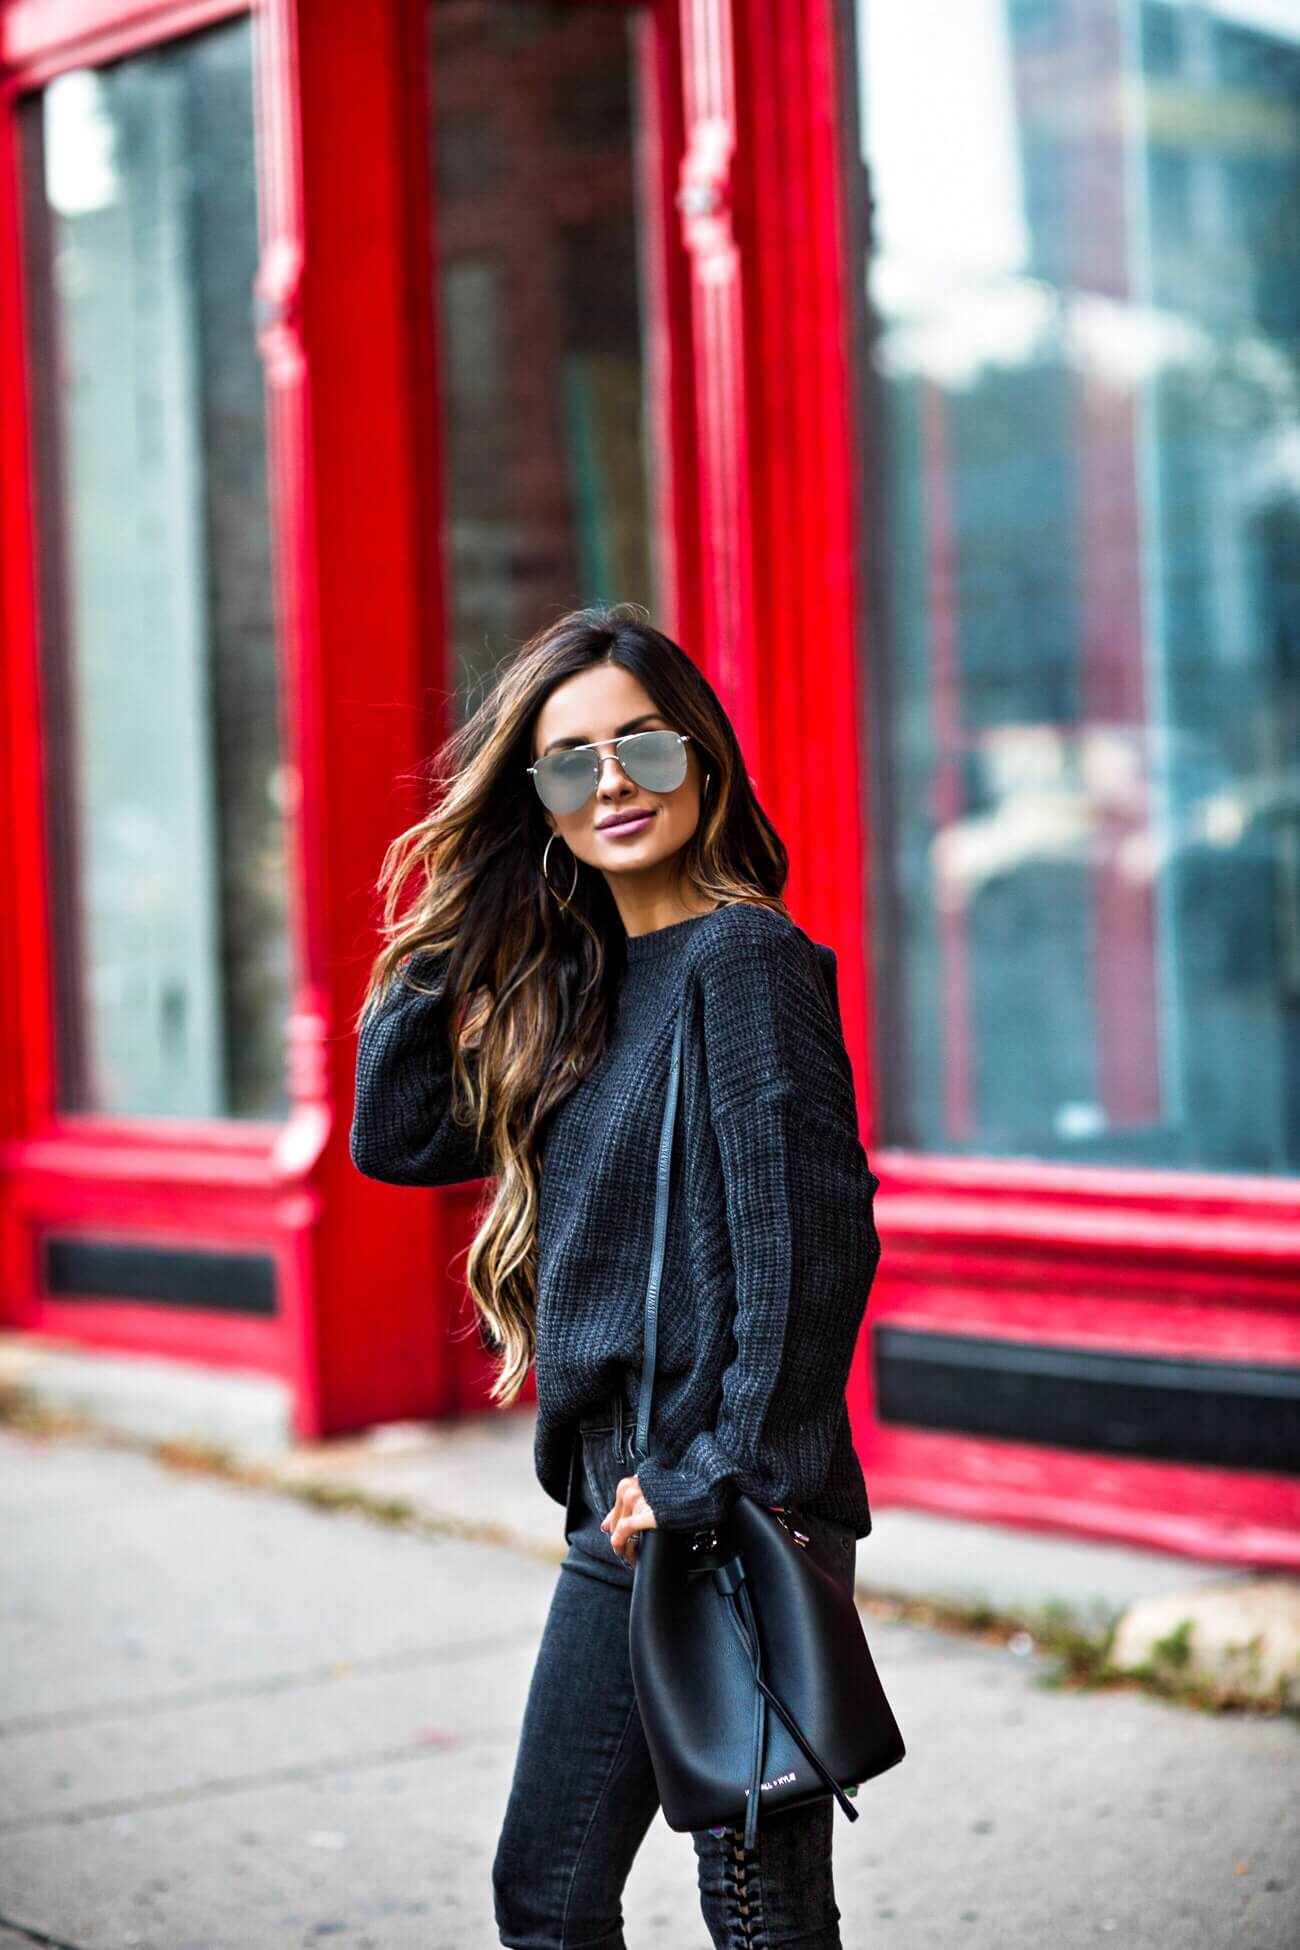 fashion blogger mia mia mine wearing a black sweater and quay sunglasses from bloomindale's